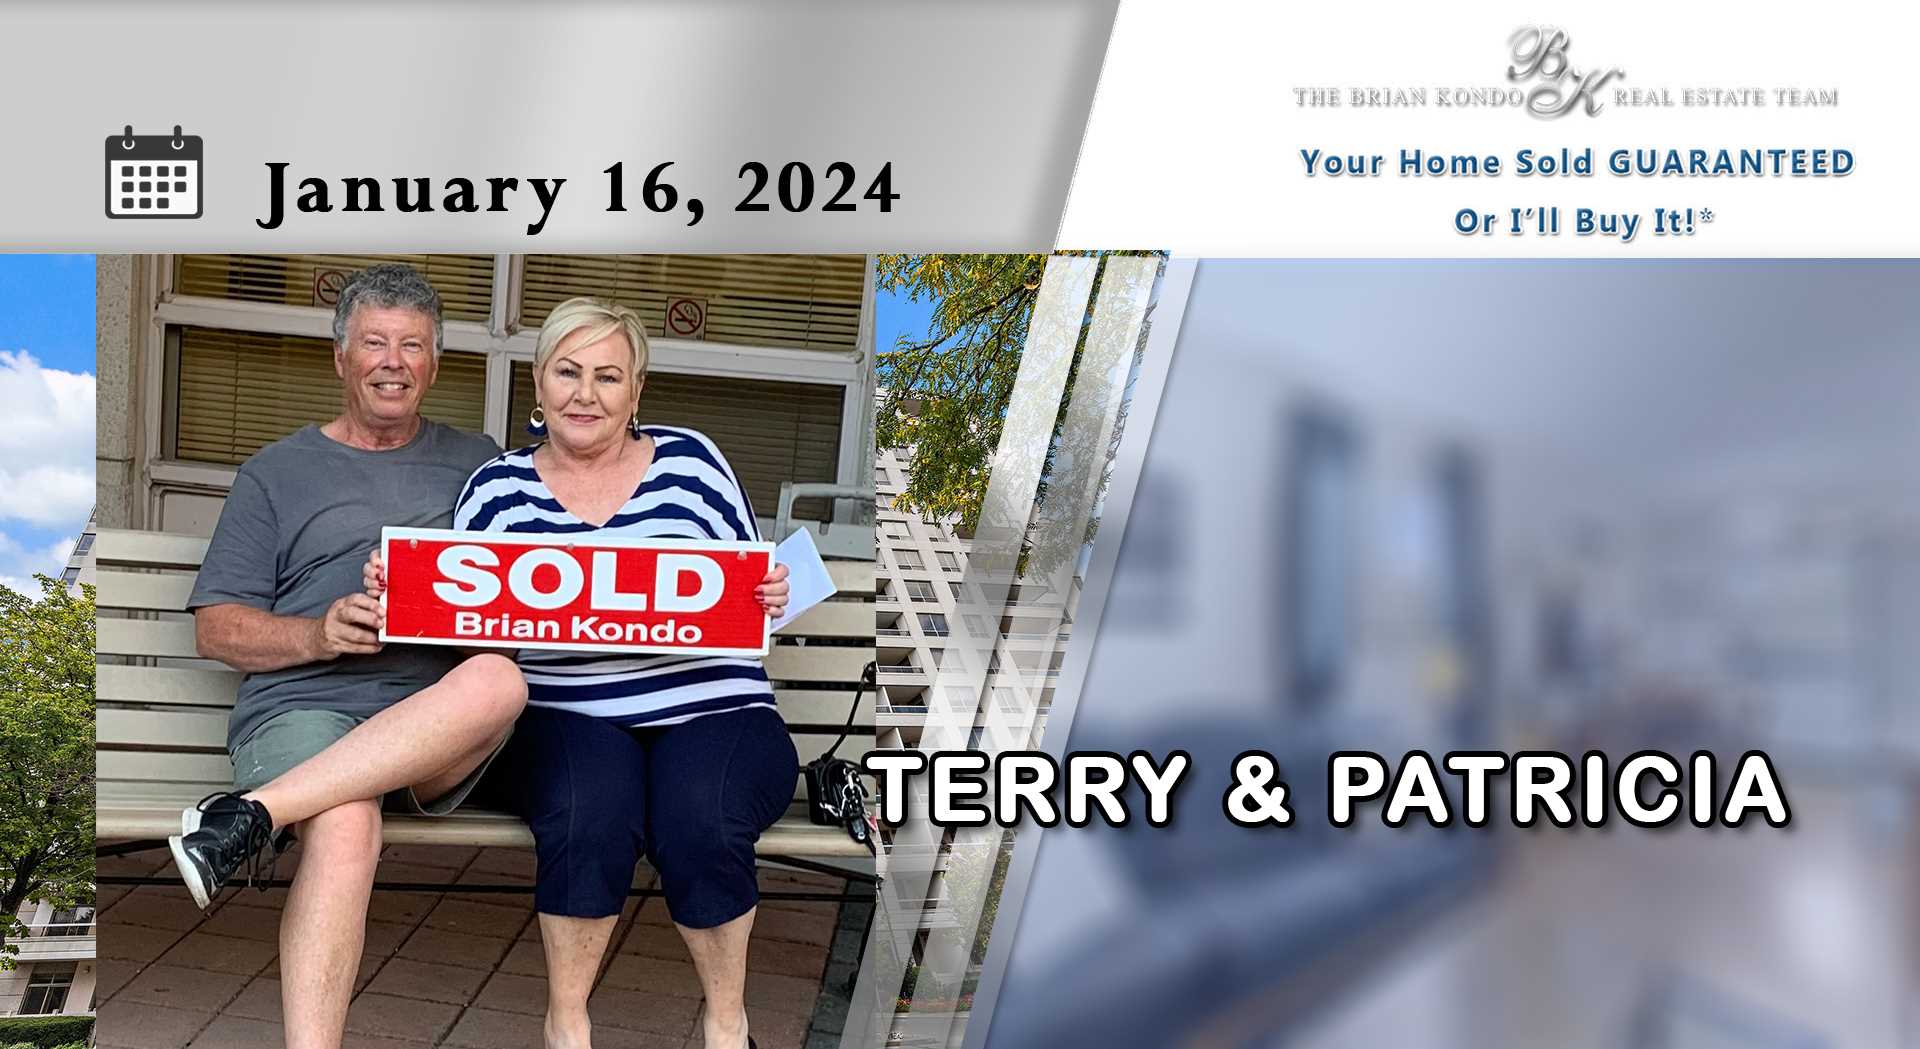 What Our Clients Had to Say About Working With The Brian Kondo Real Estate Team | Terry & Patricia